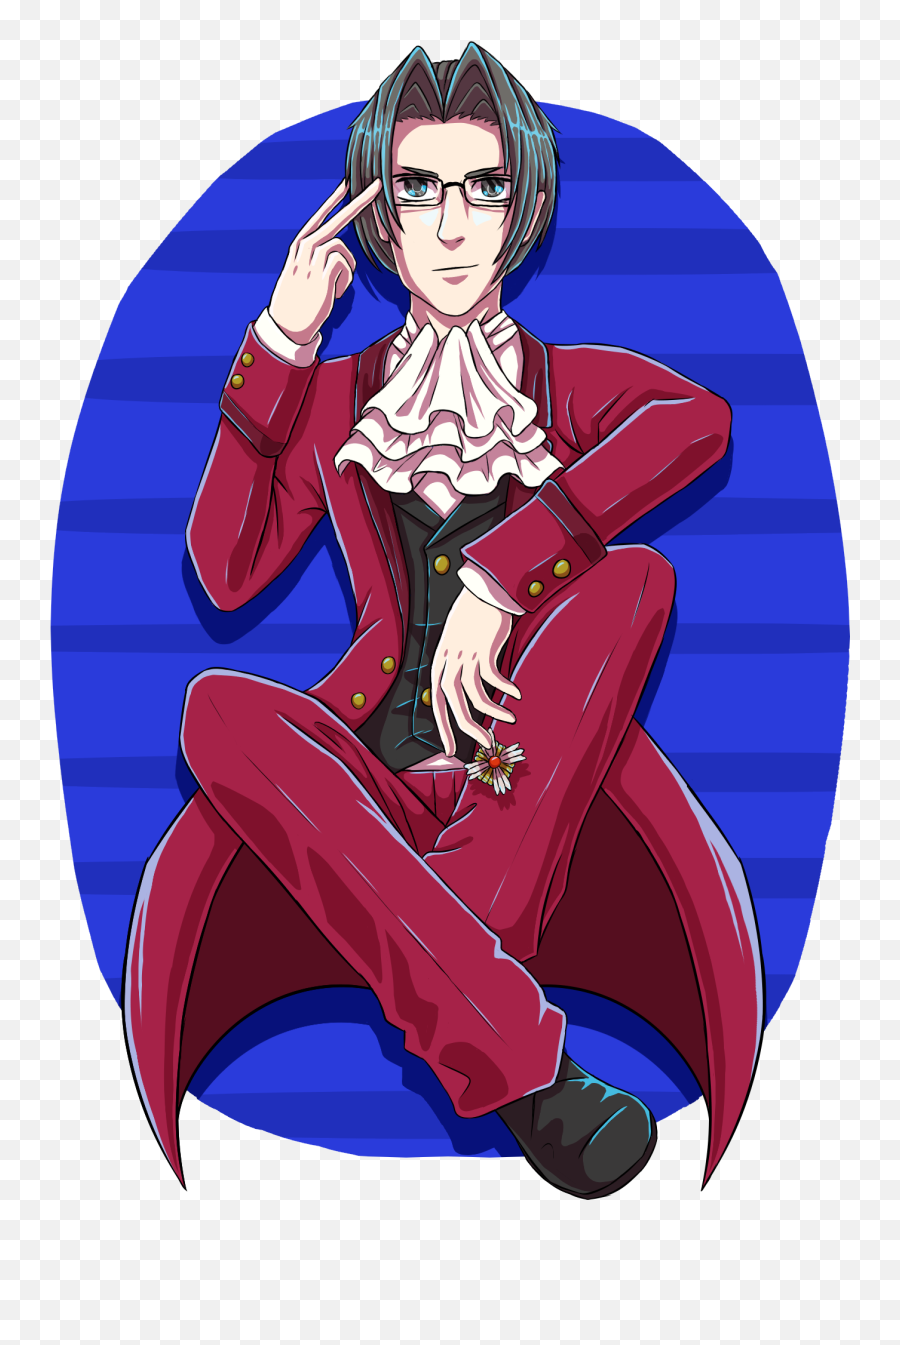 My Final Prosecutor Drawing For Now - Sitting Png,Miles Edgeworth Icon